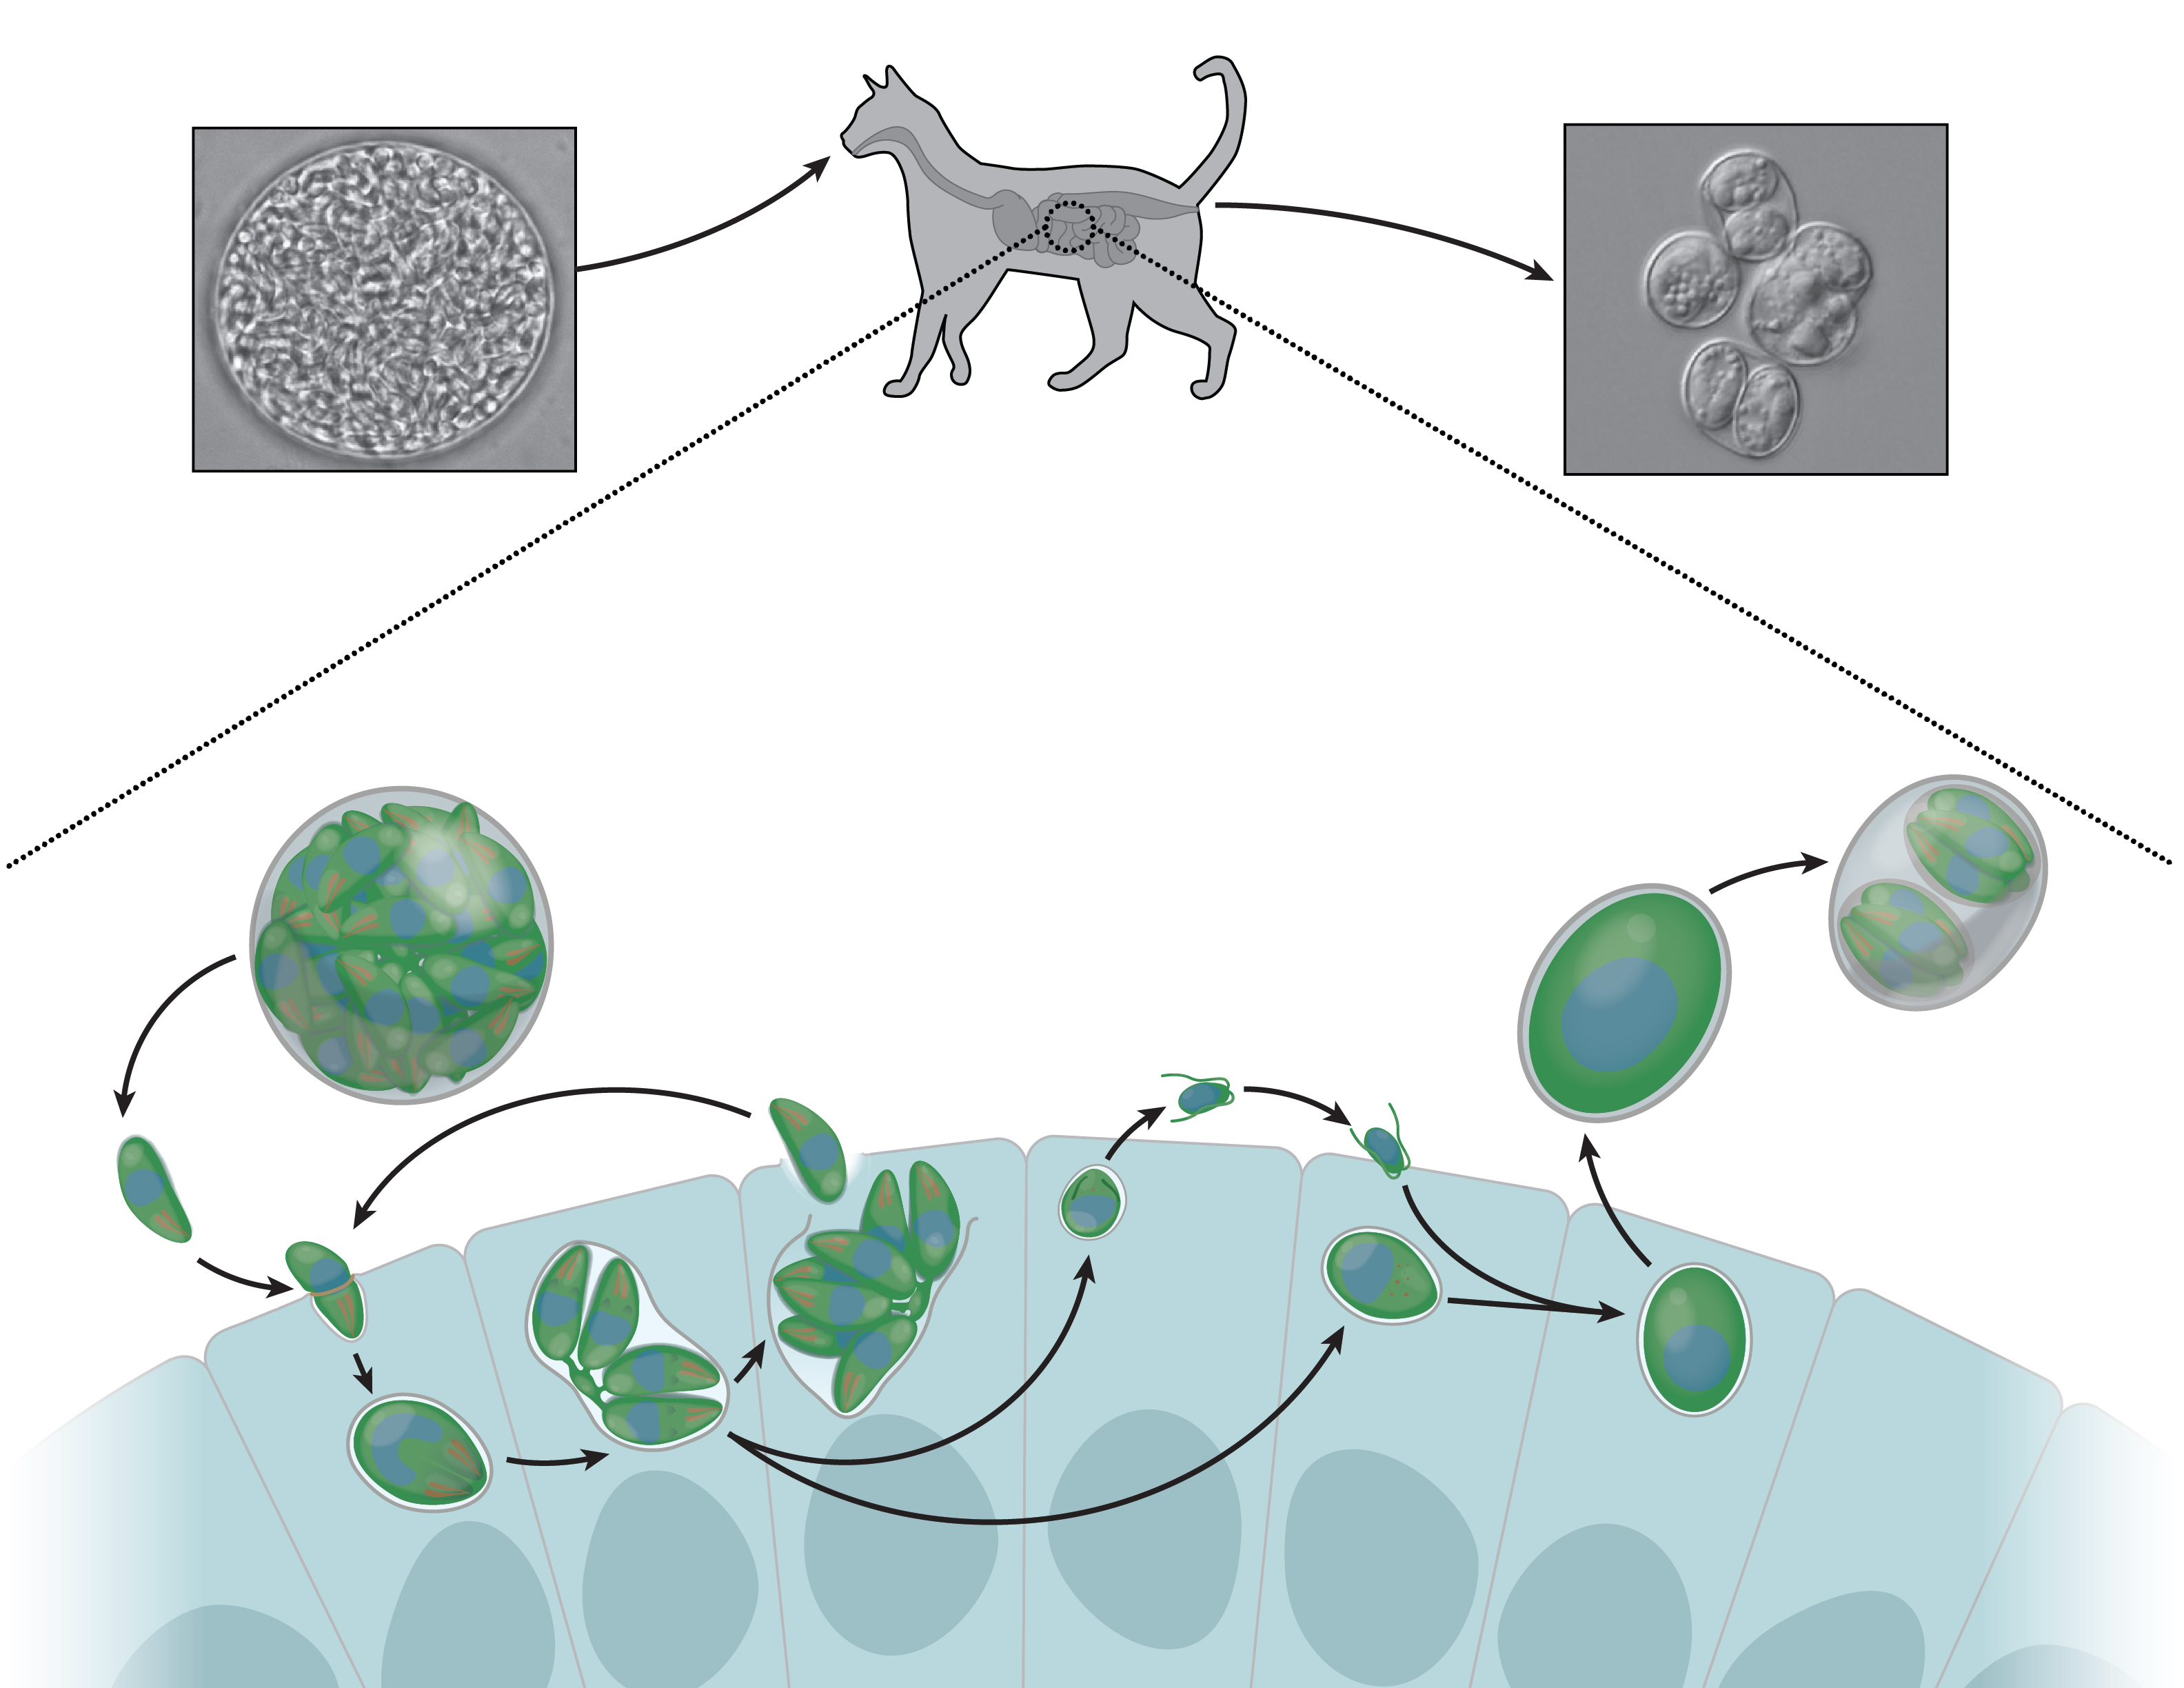 Toxoplasma gondii parasite's life cycle in cats